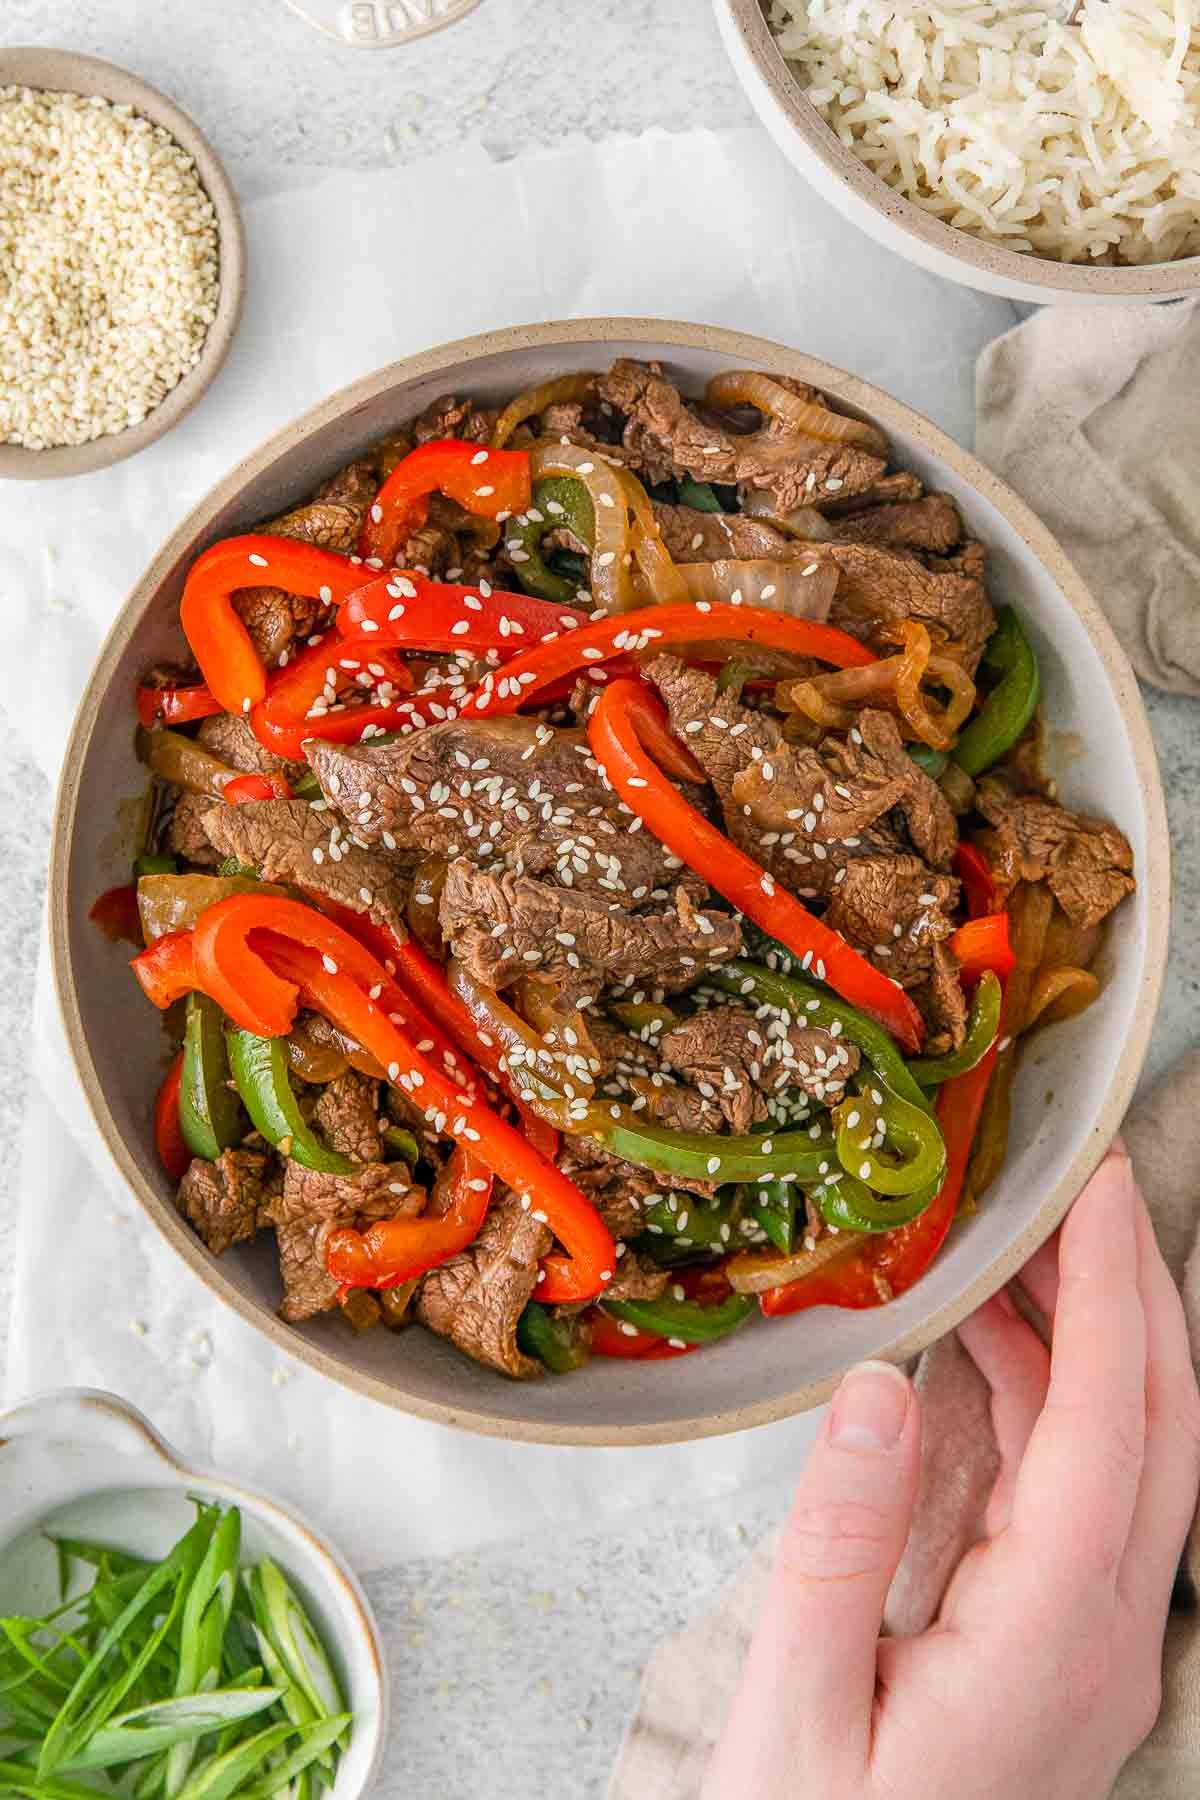 Cooked steak with onion, green and red bell peppers topped with sesame seeds in white bowl.